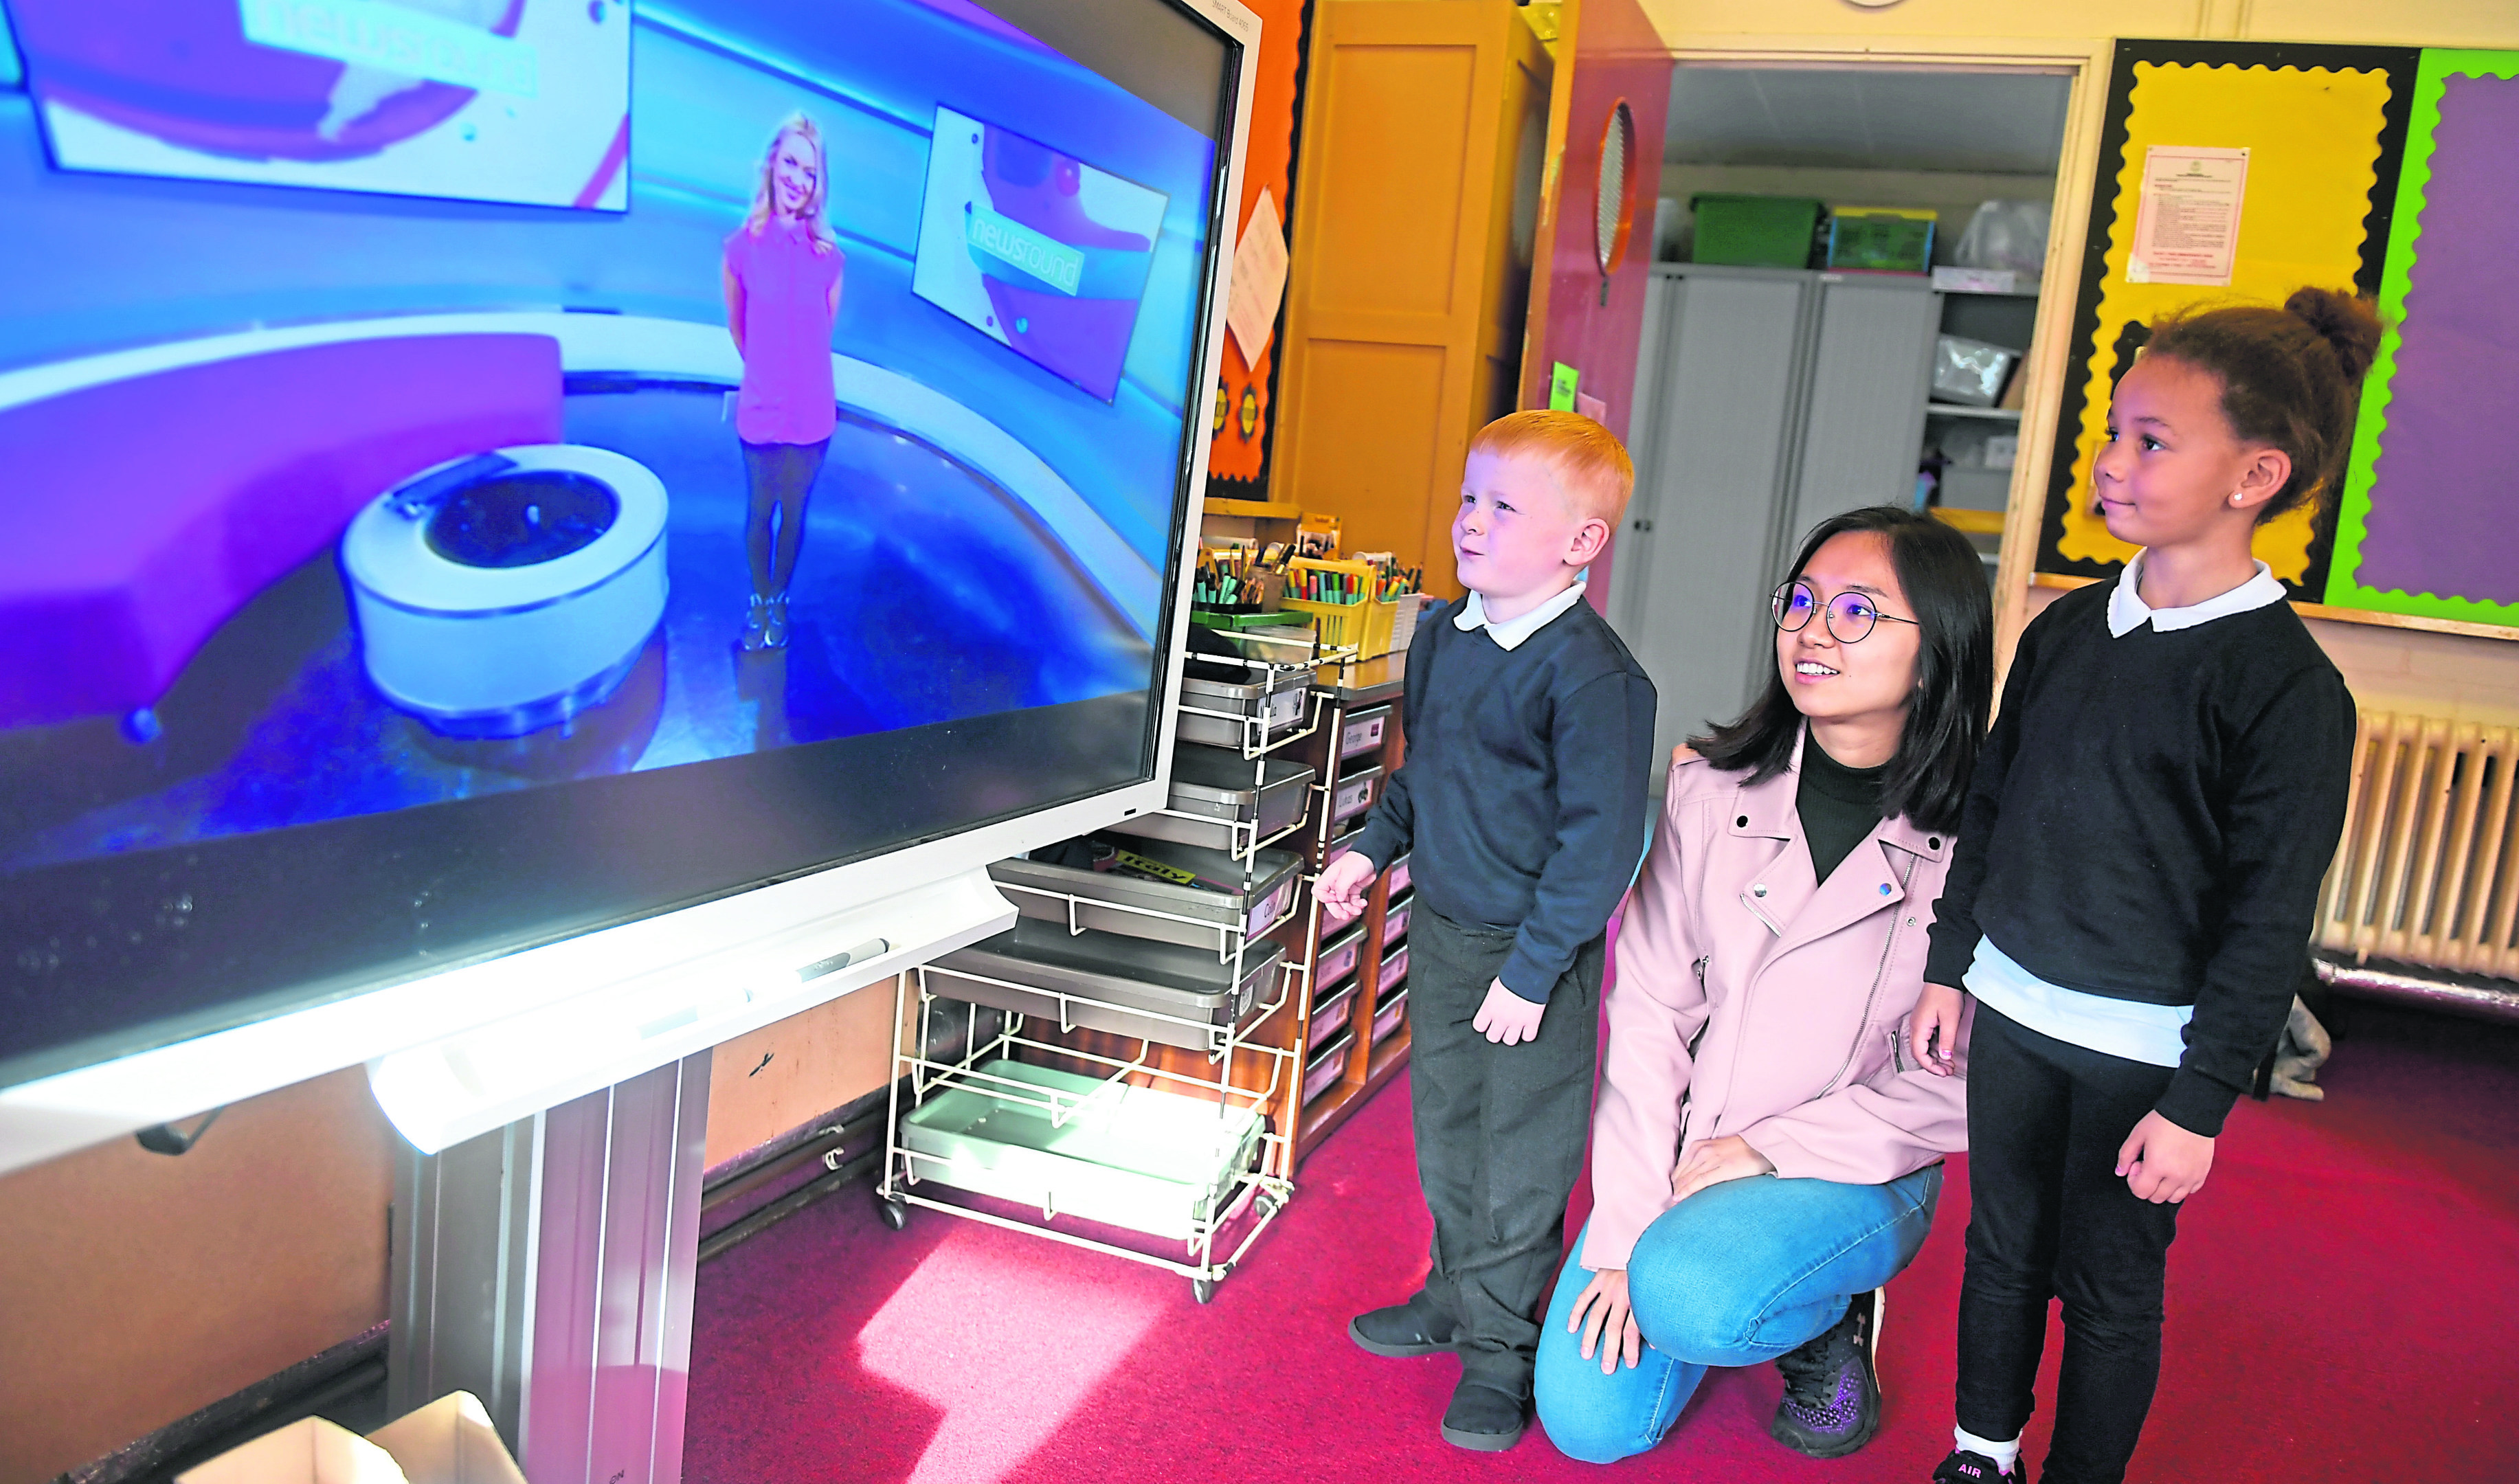 Student Jih Ian cor with pupils Anthony Stars cor and Alicia Simpson talk about screen time.